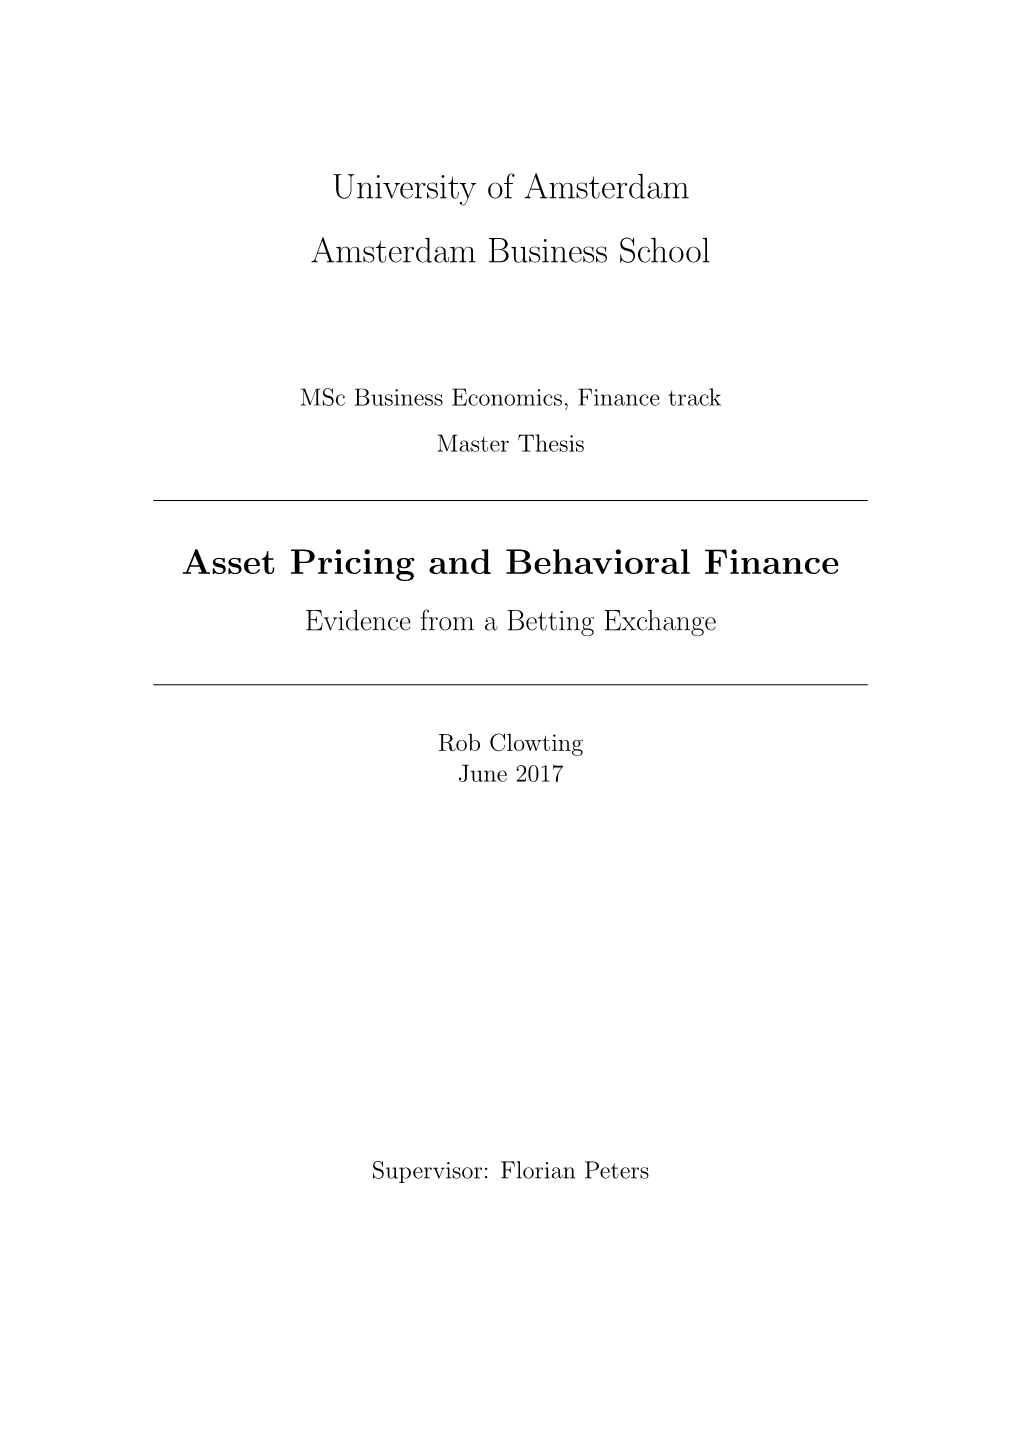 University of Amsterdam Amsterdam Business School Asset Pricing And